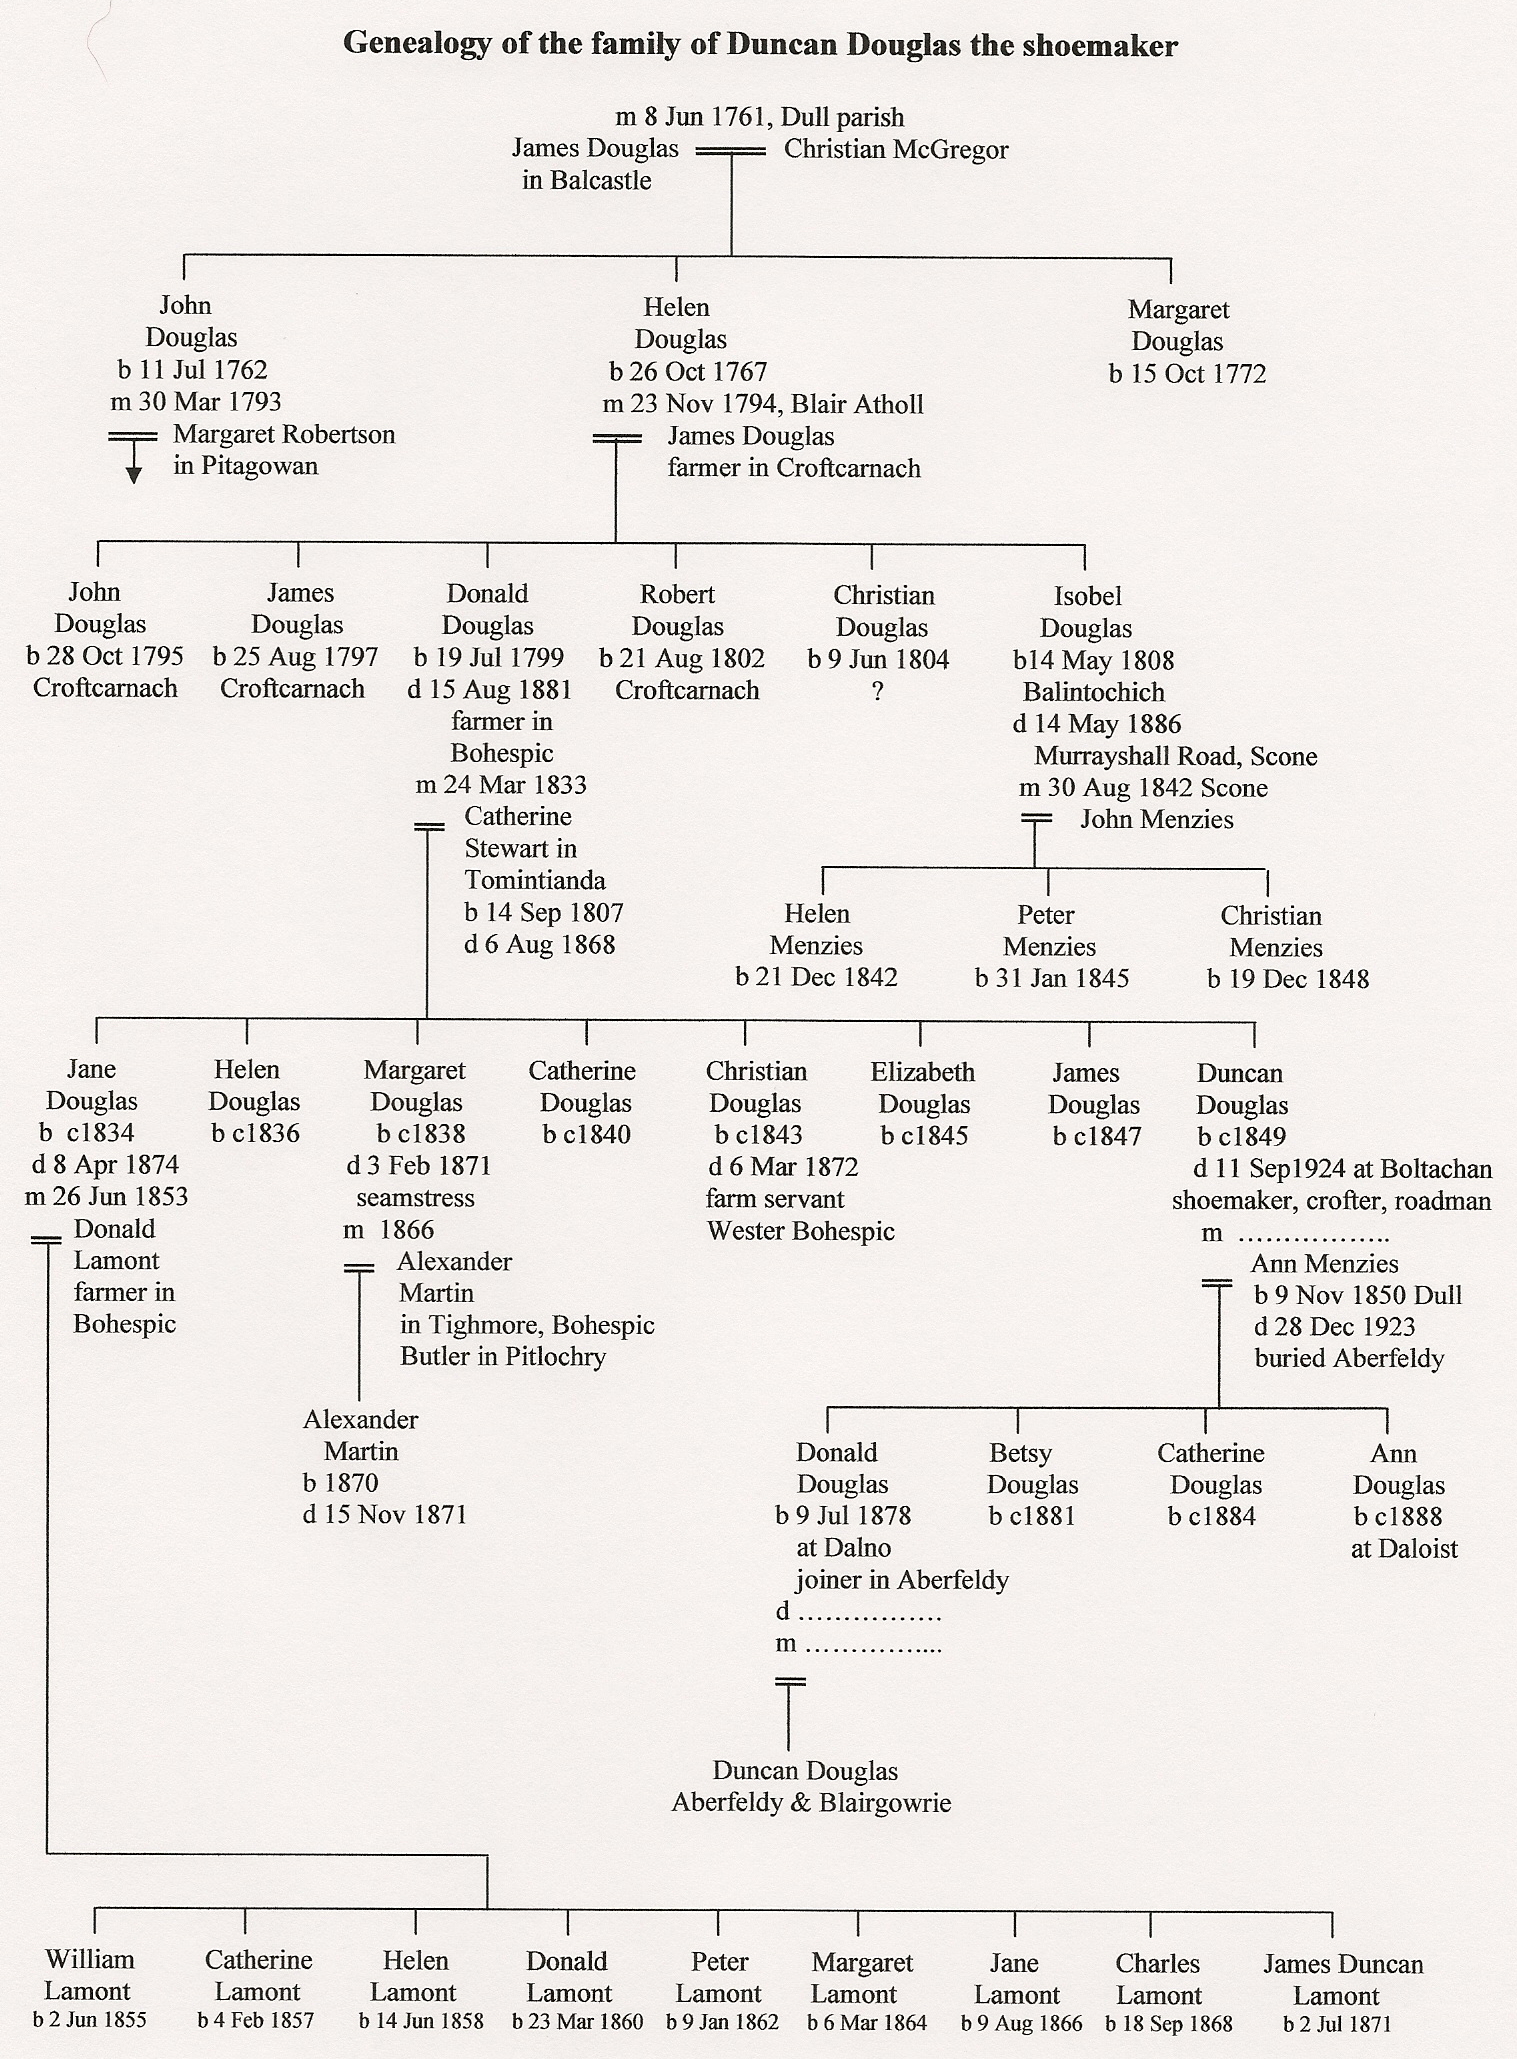 The Genealogy of the family of Duncan Douglas the shoemaker